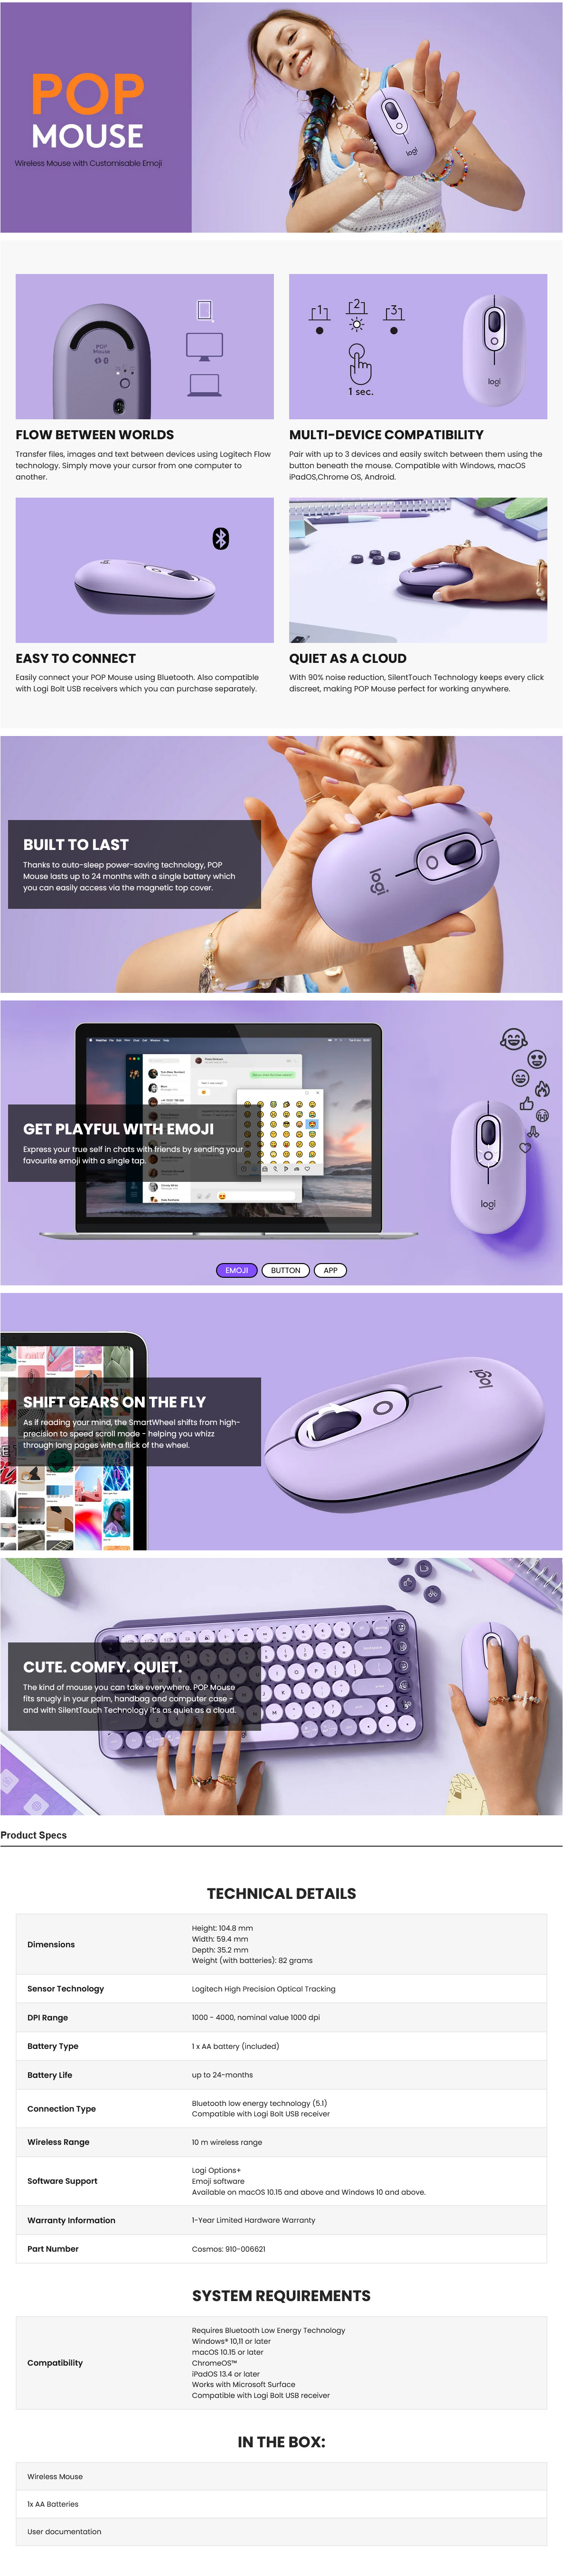 A large marketing image providing additional information about the product Logitech POP Wireless Mouse - Cosmos Lavender - Additional alt info not provided